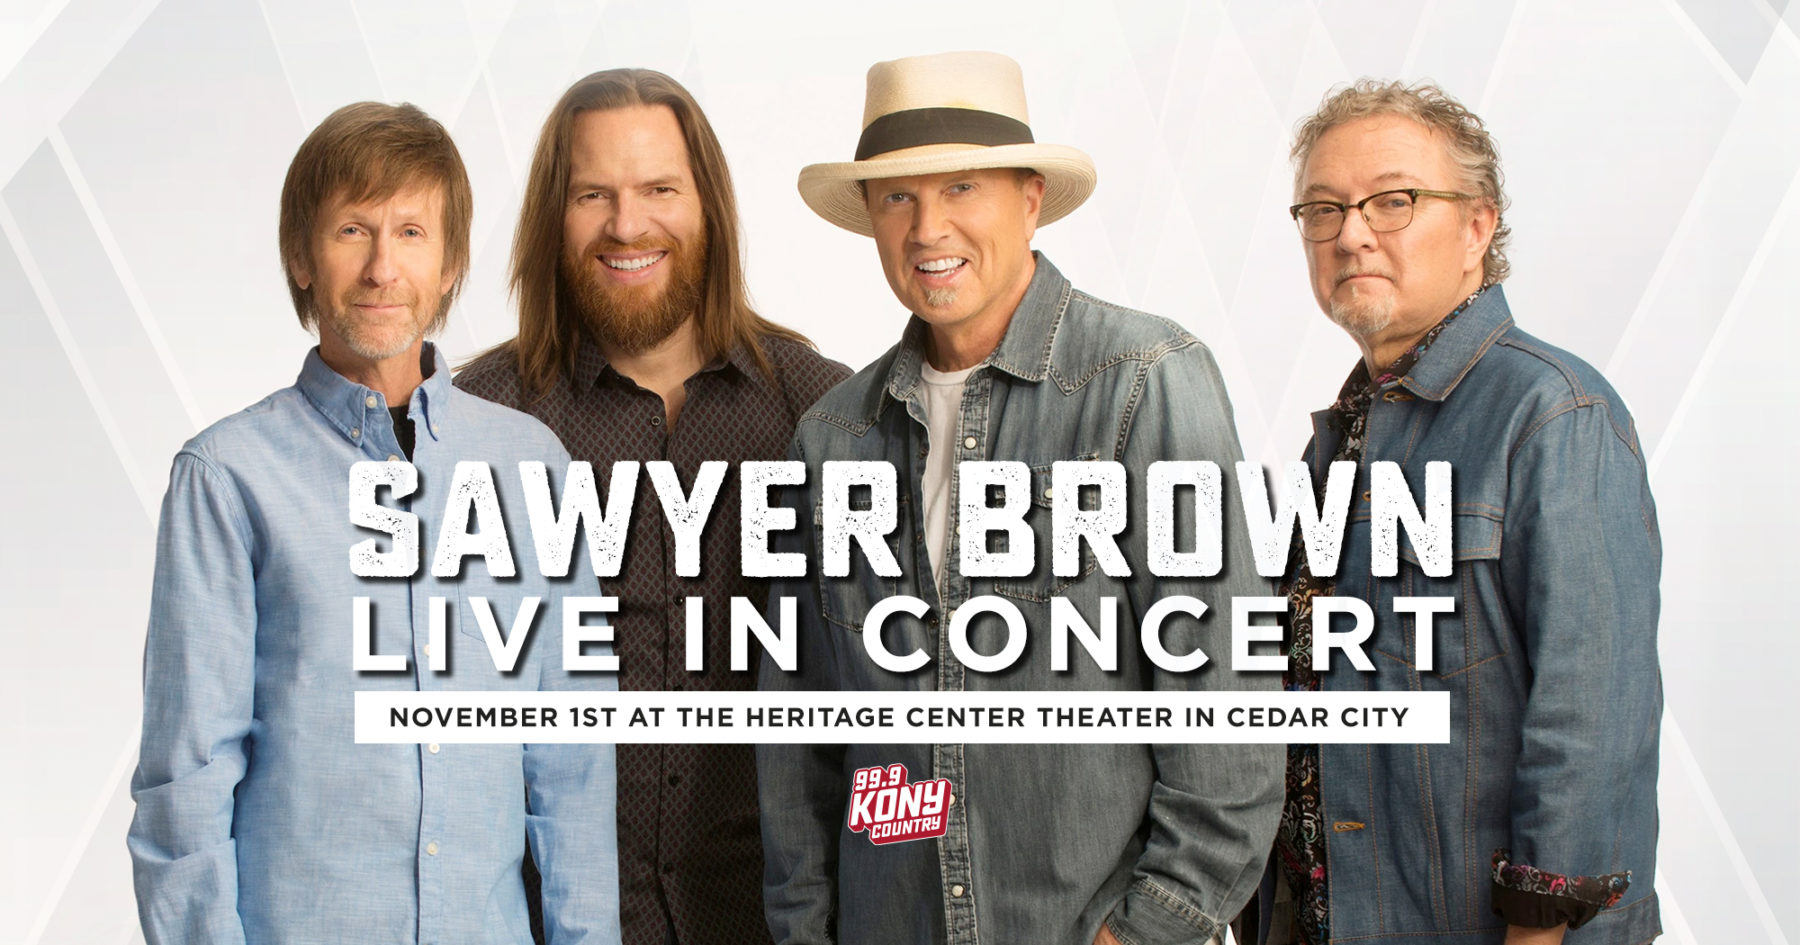 Sawyer Brown Live in Concert 99.9 KONY Country Radio St.